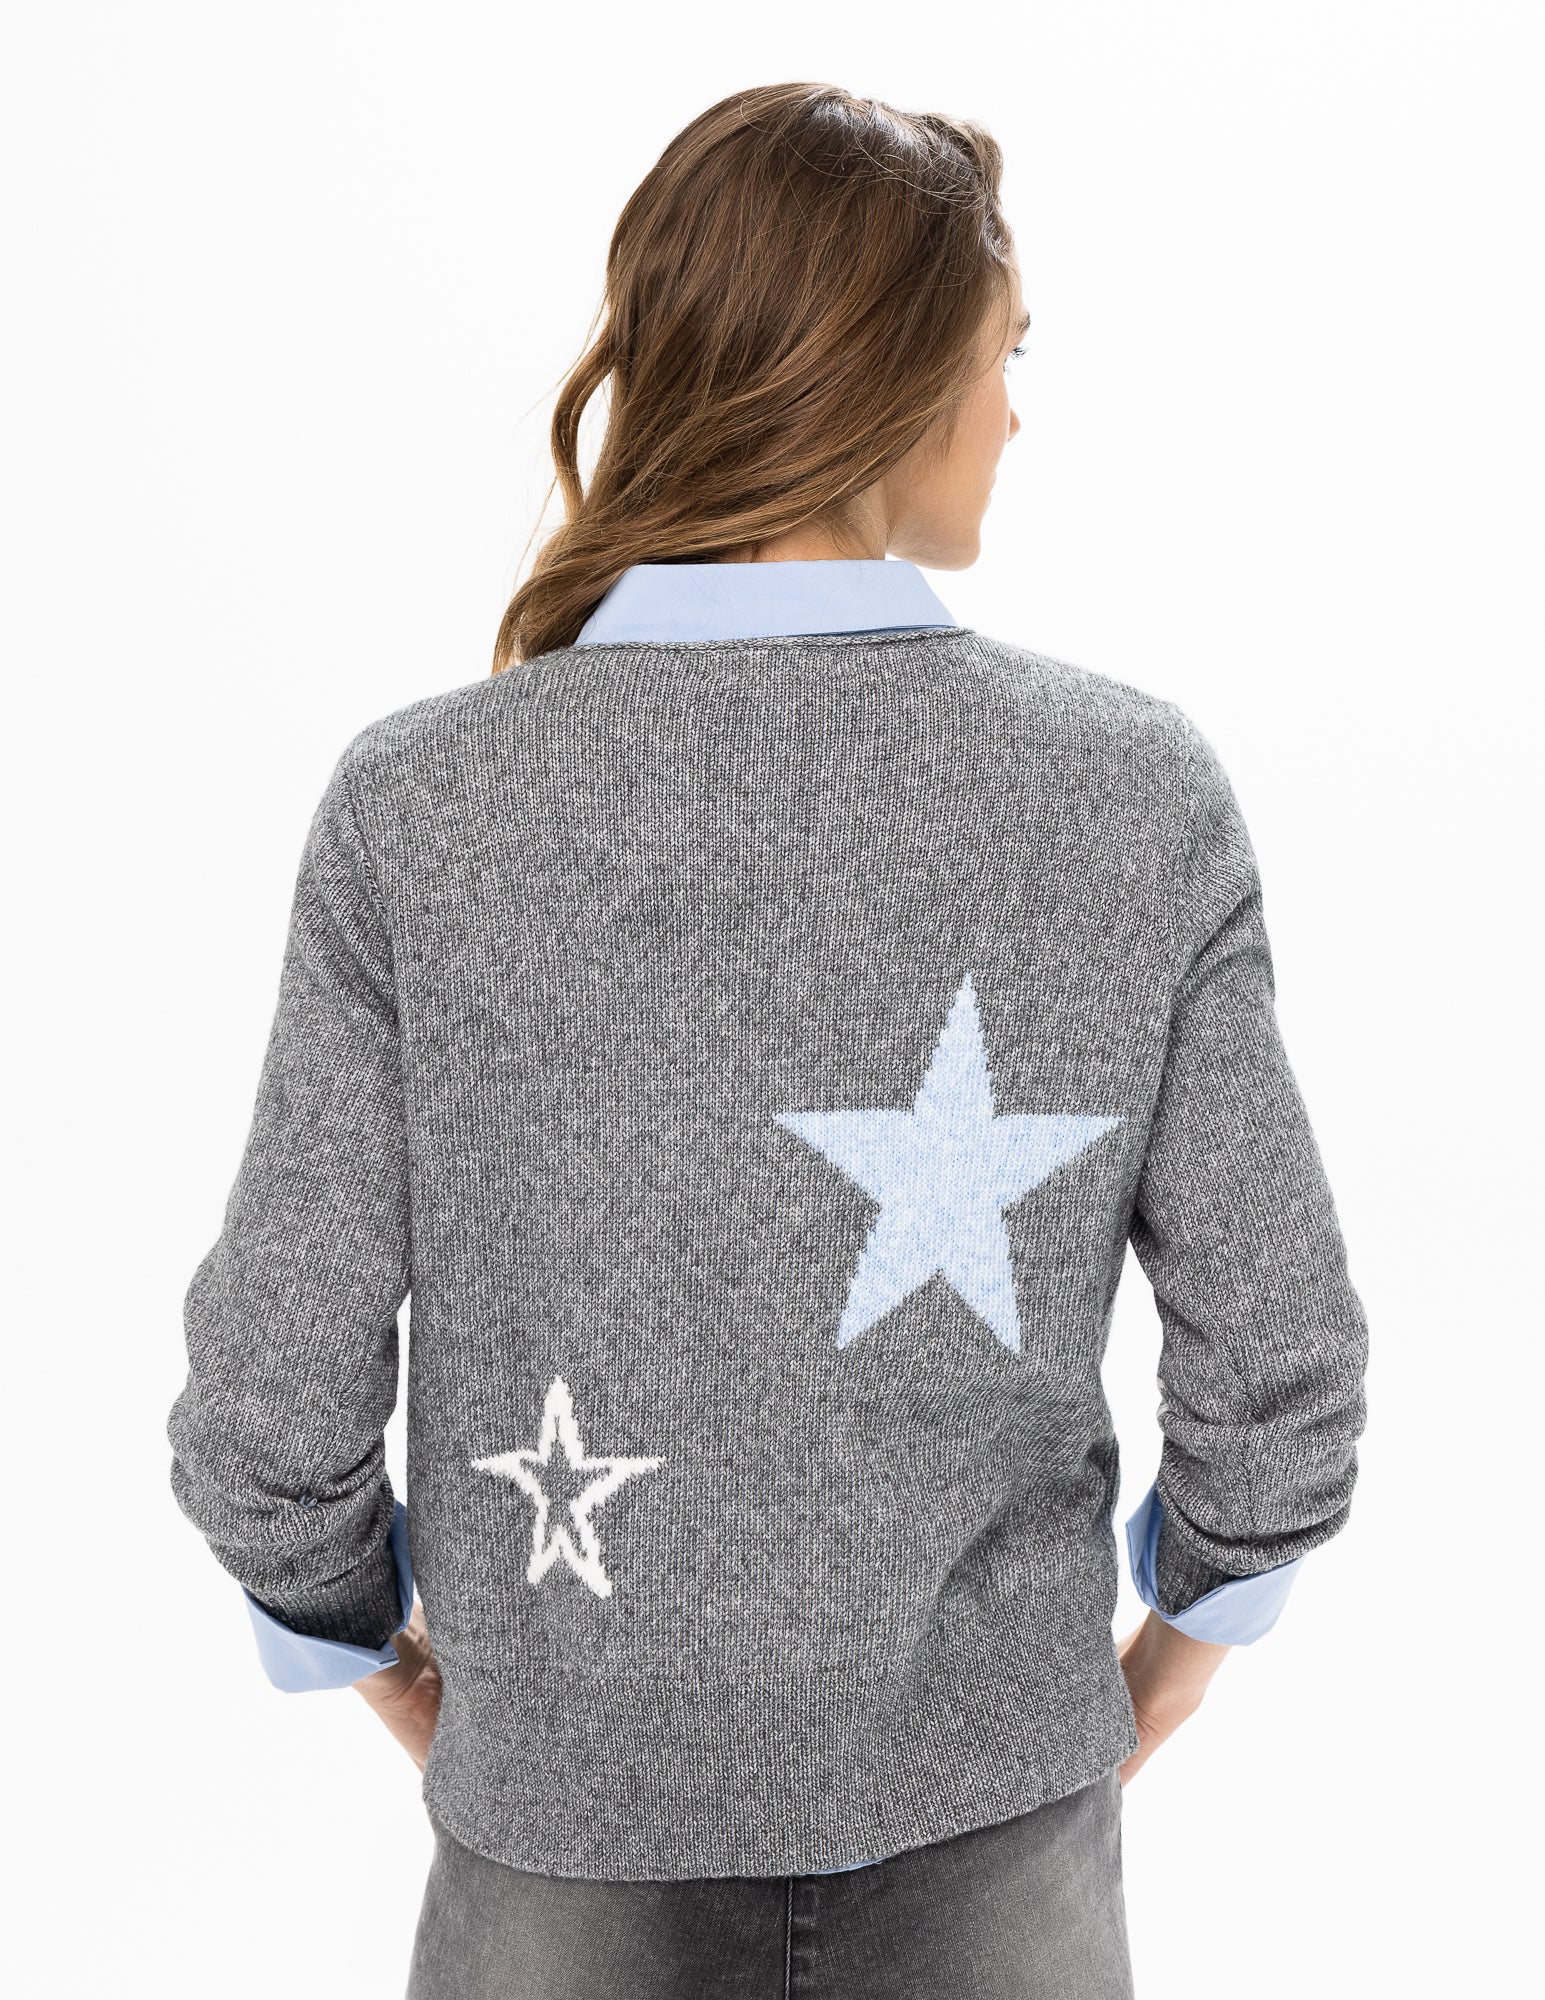 Star Sweater R6863-4126 (2 Colors)